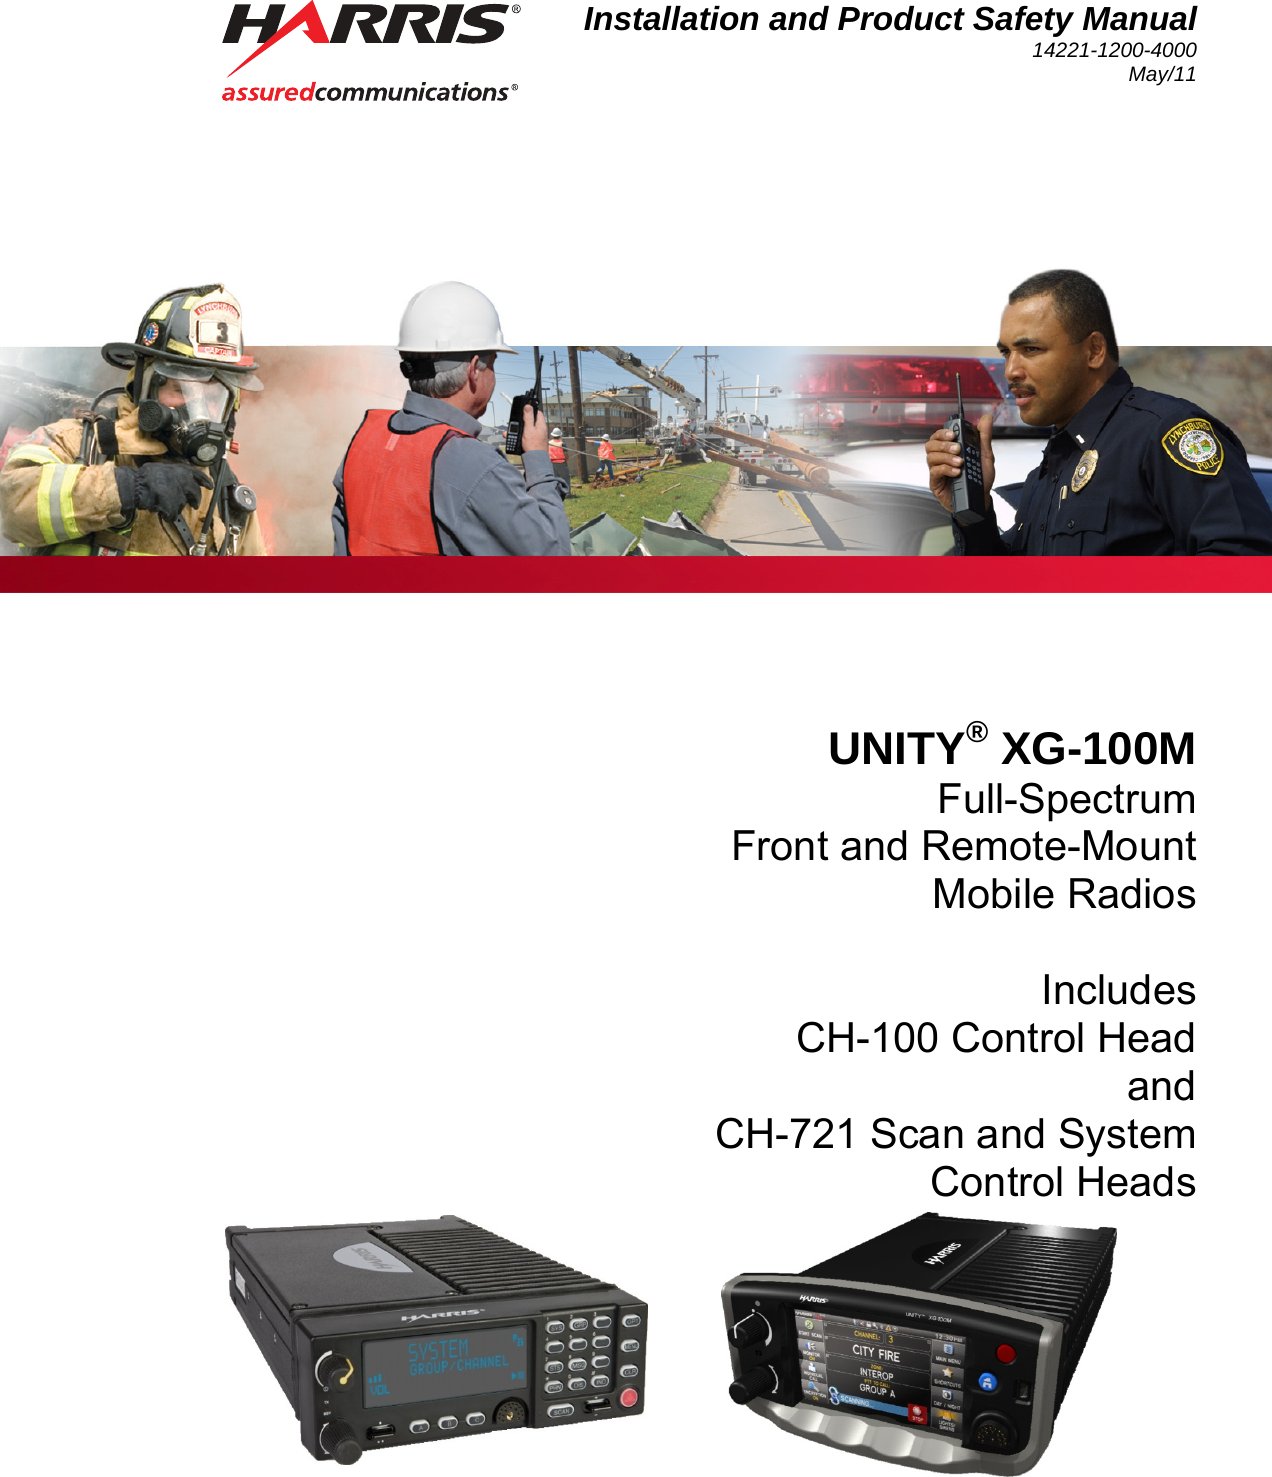 Installation and Product Safety Manual 14221-1200-4000 May/11  UNITY® XG-100M Full-Spectrum Front and Remote-Mount Mobile Radios  Includes CH-100 Control Head and CH-721 Scan and System Control Heads  